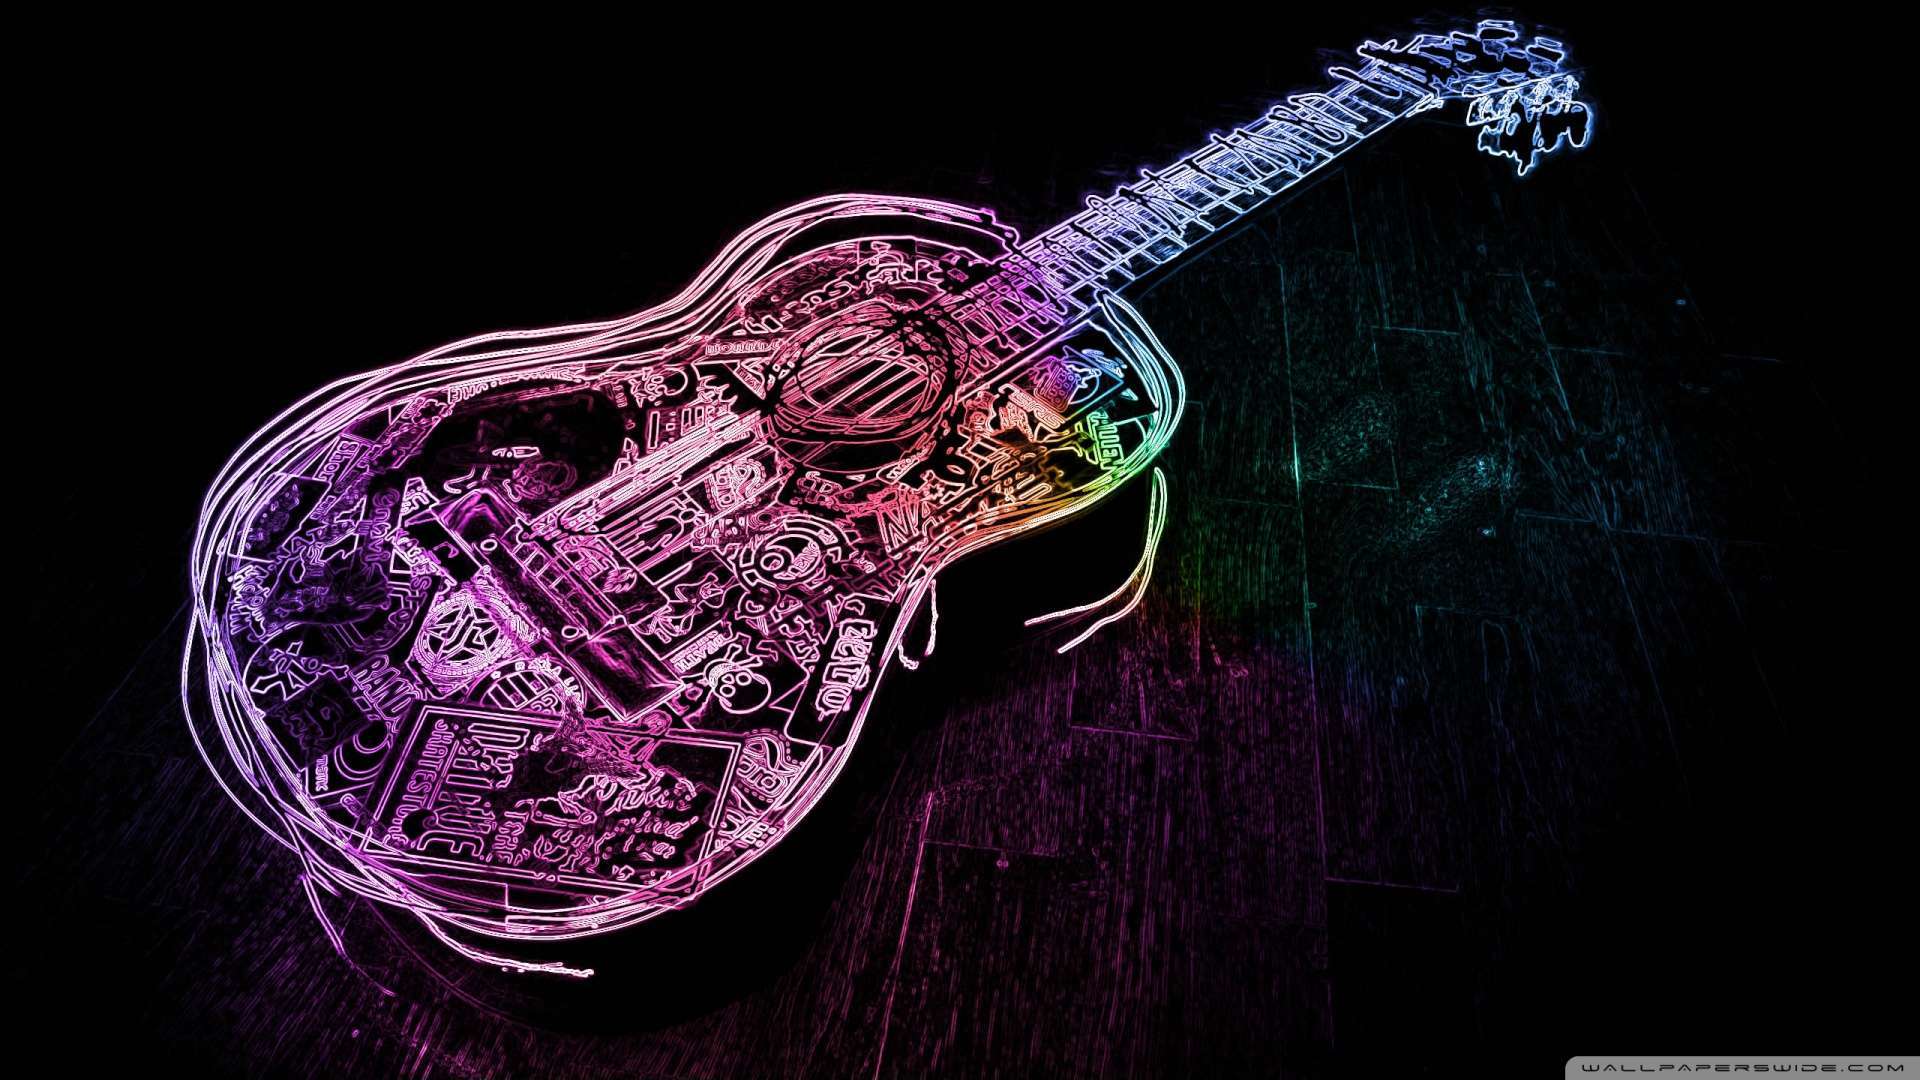 Wallpaper Guitar 1080p HD Upload At January By